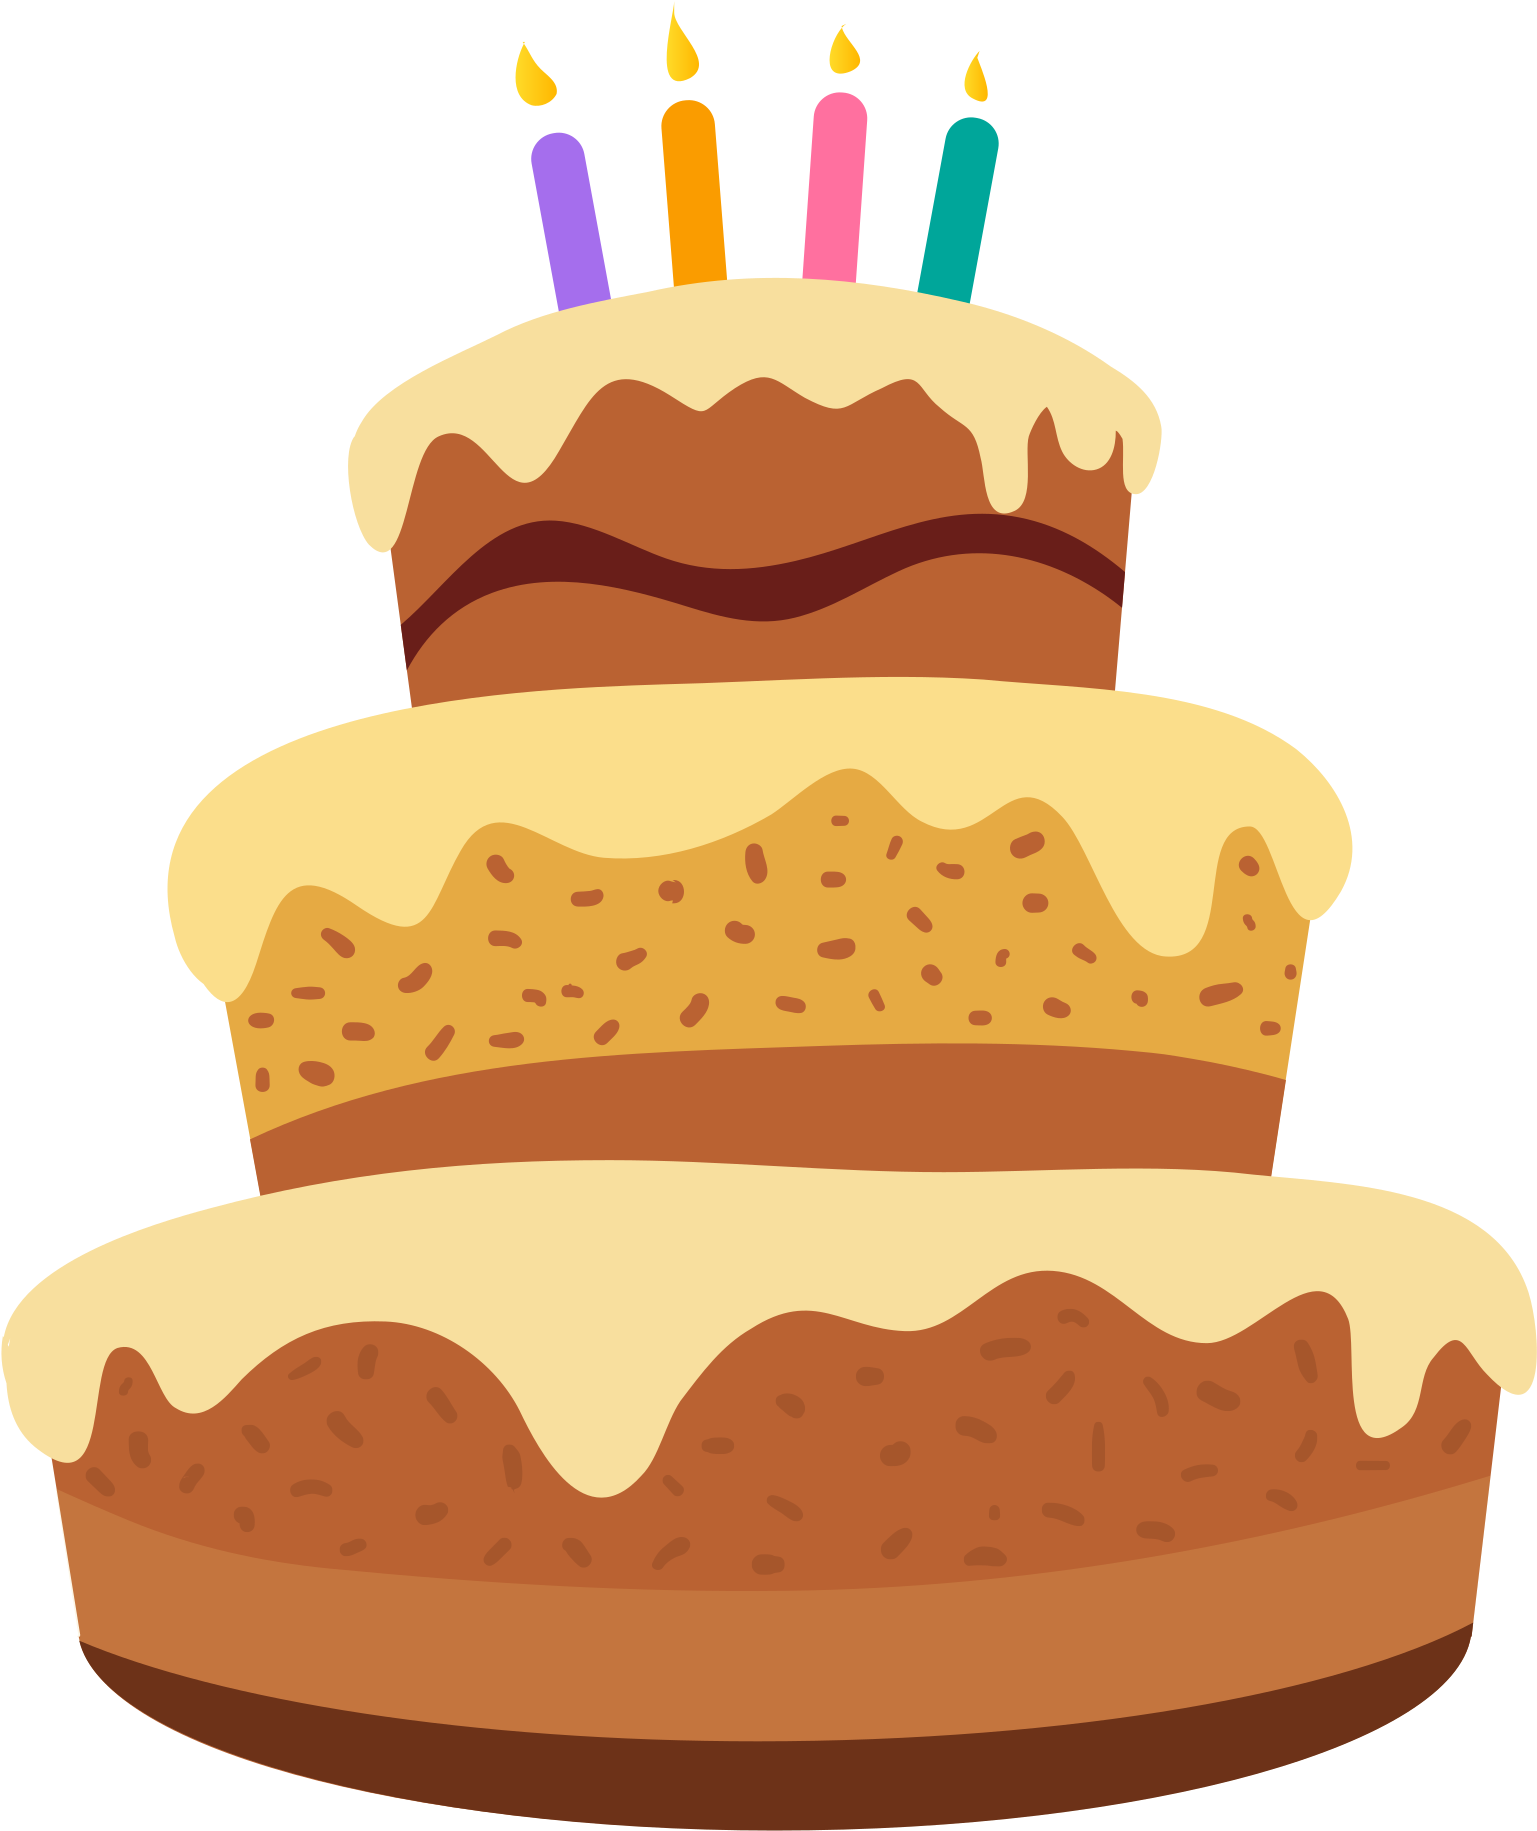 Cake PNG Transparent Images, Pictures, Photos | PNG Arts